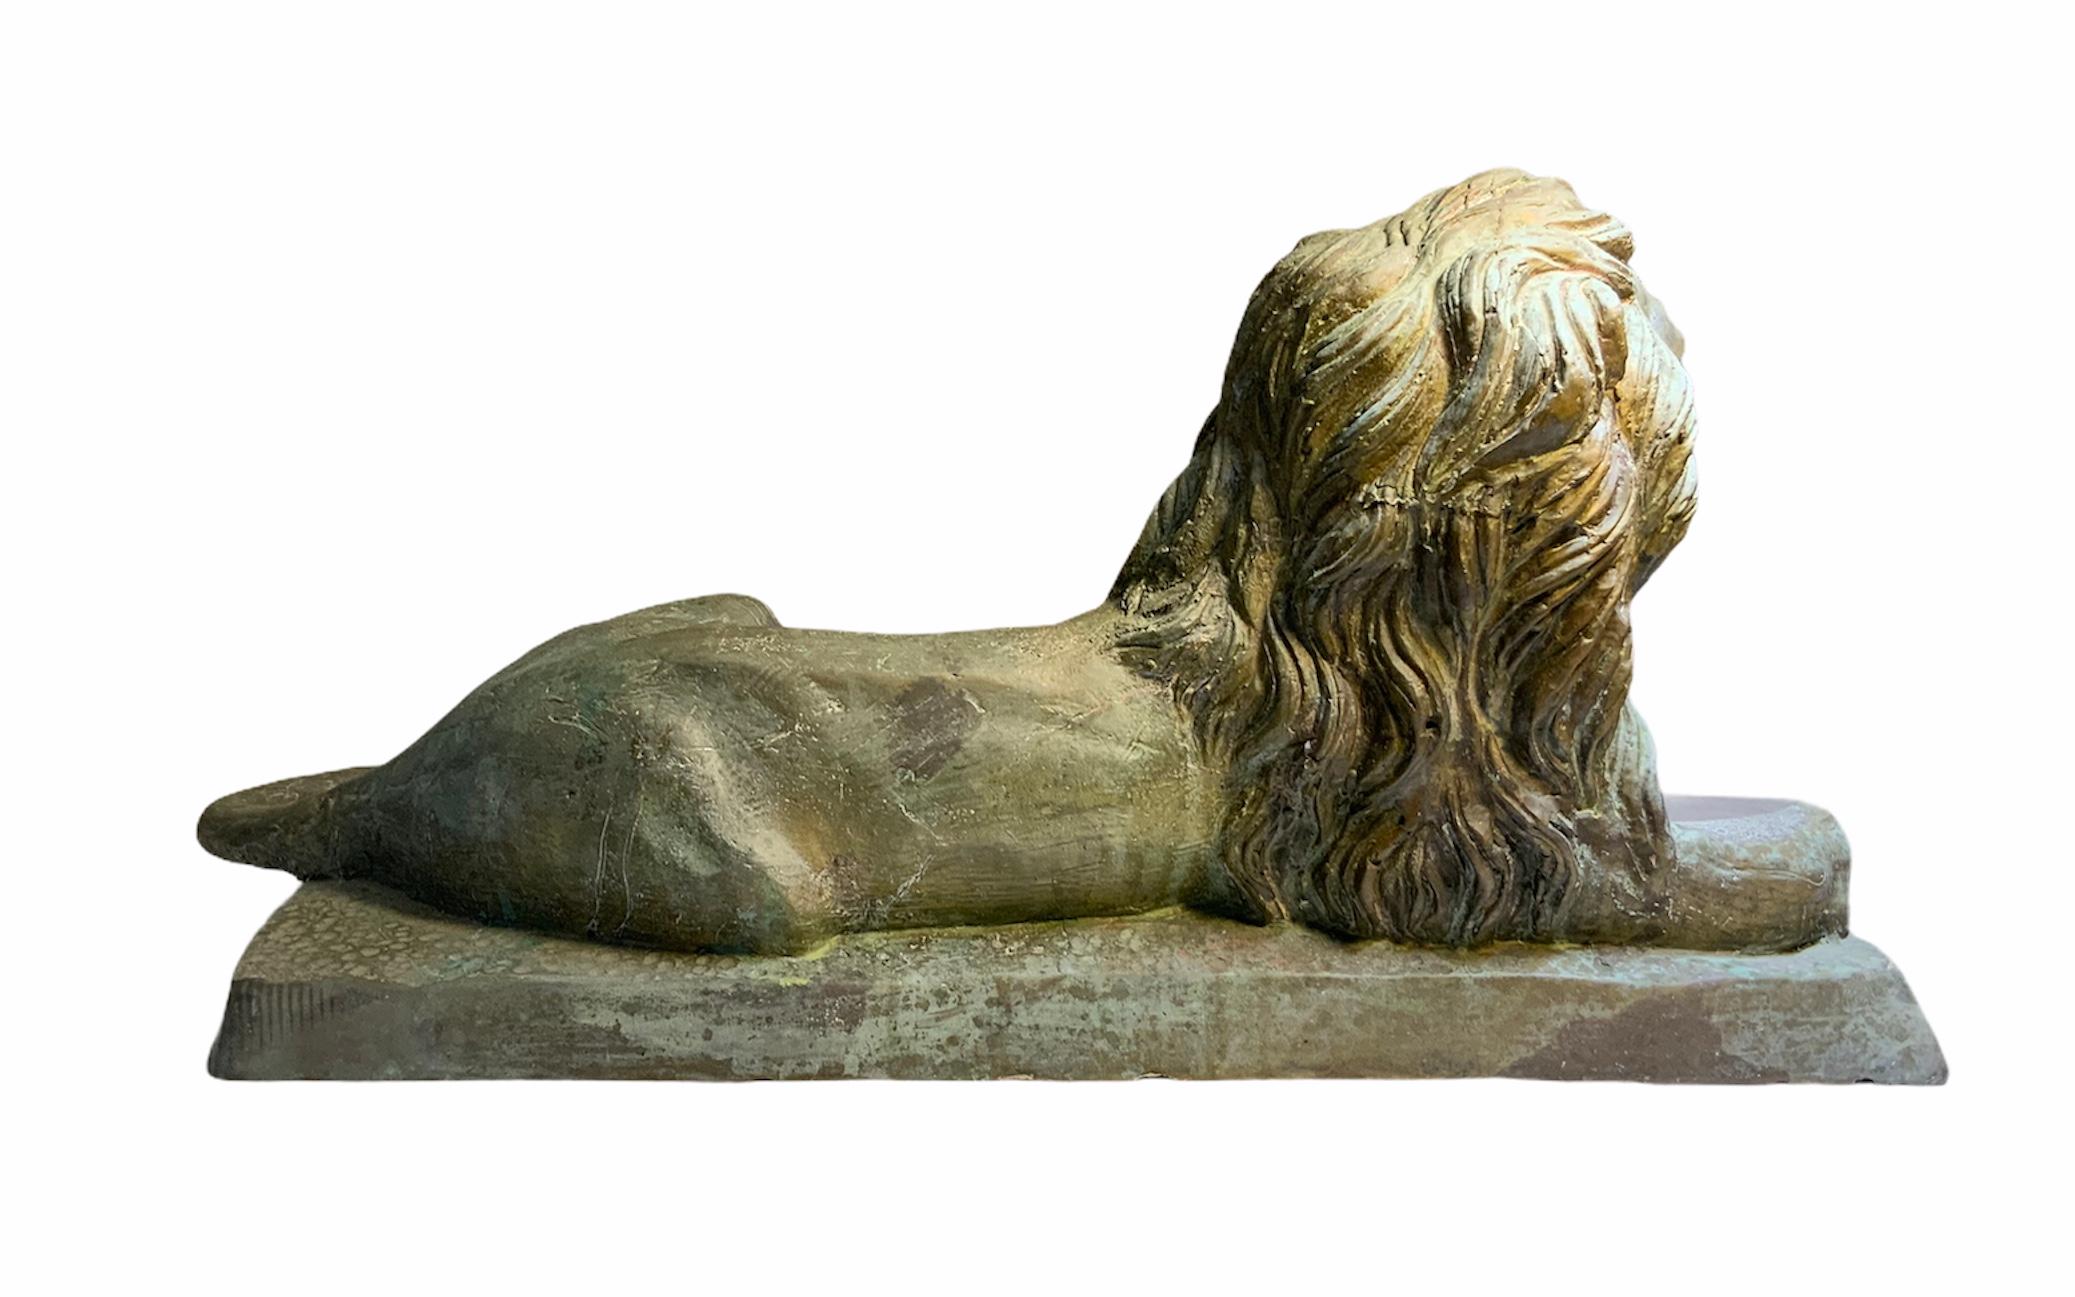 This is a very well made large lion figure bronze sculpture laying down in a rectangular base. The carving details of the thick mane, paws, tail, nose, and eyes are remarkable. In middle eastern culture, the lion is symbol of courage and royalty.